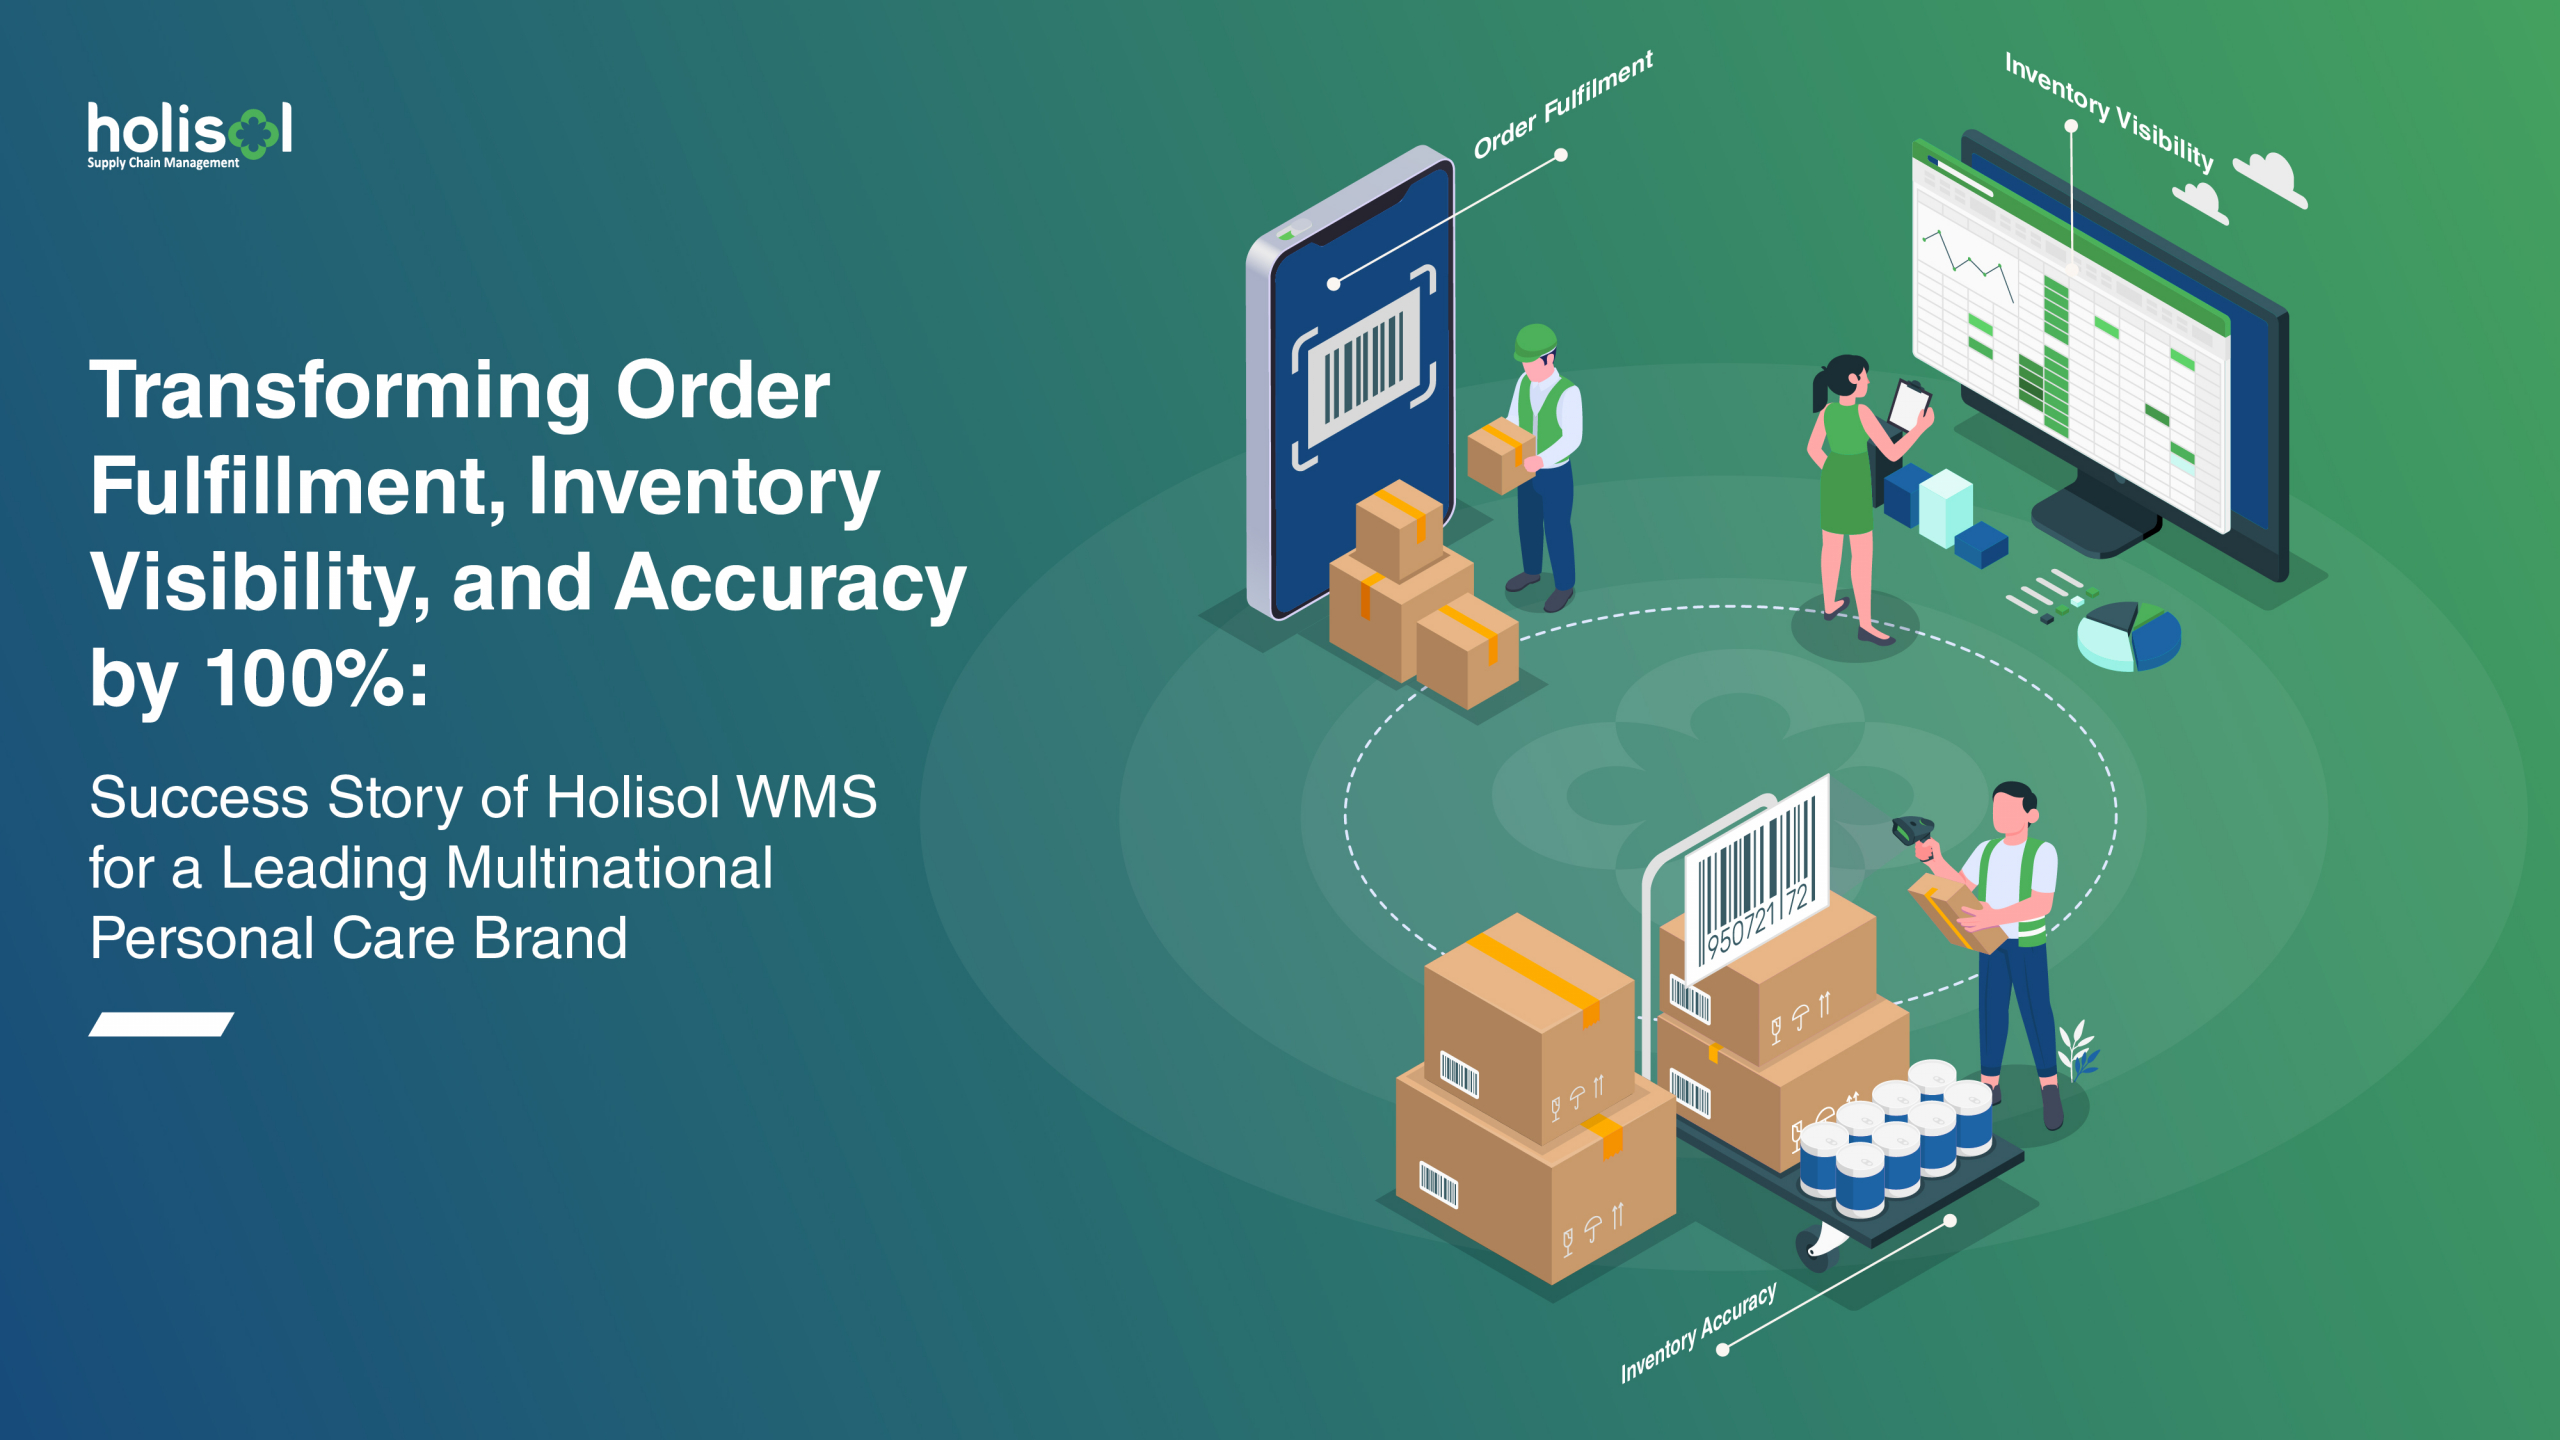 Holisol WMS transformed Order Fulfilment, Visibility, and Accuracy by 100%: A case study with a Leading Multinational Personal Care Brand